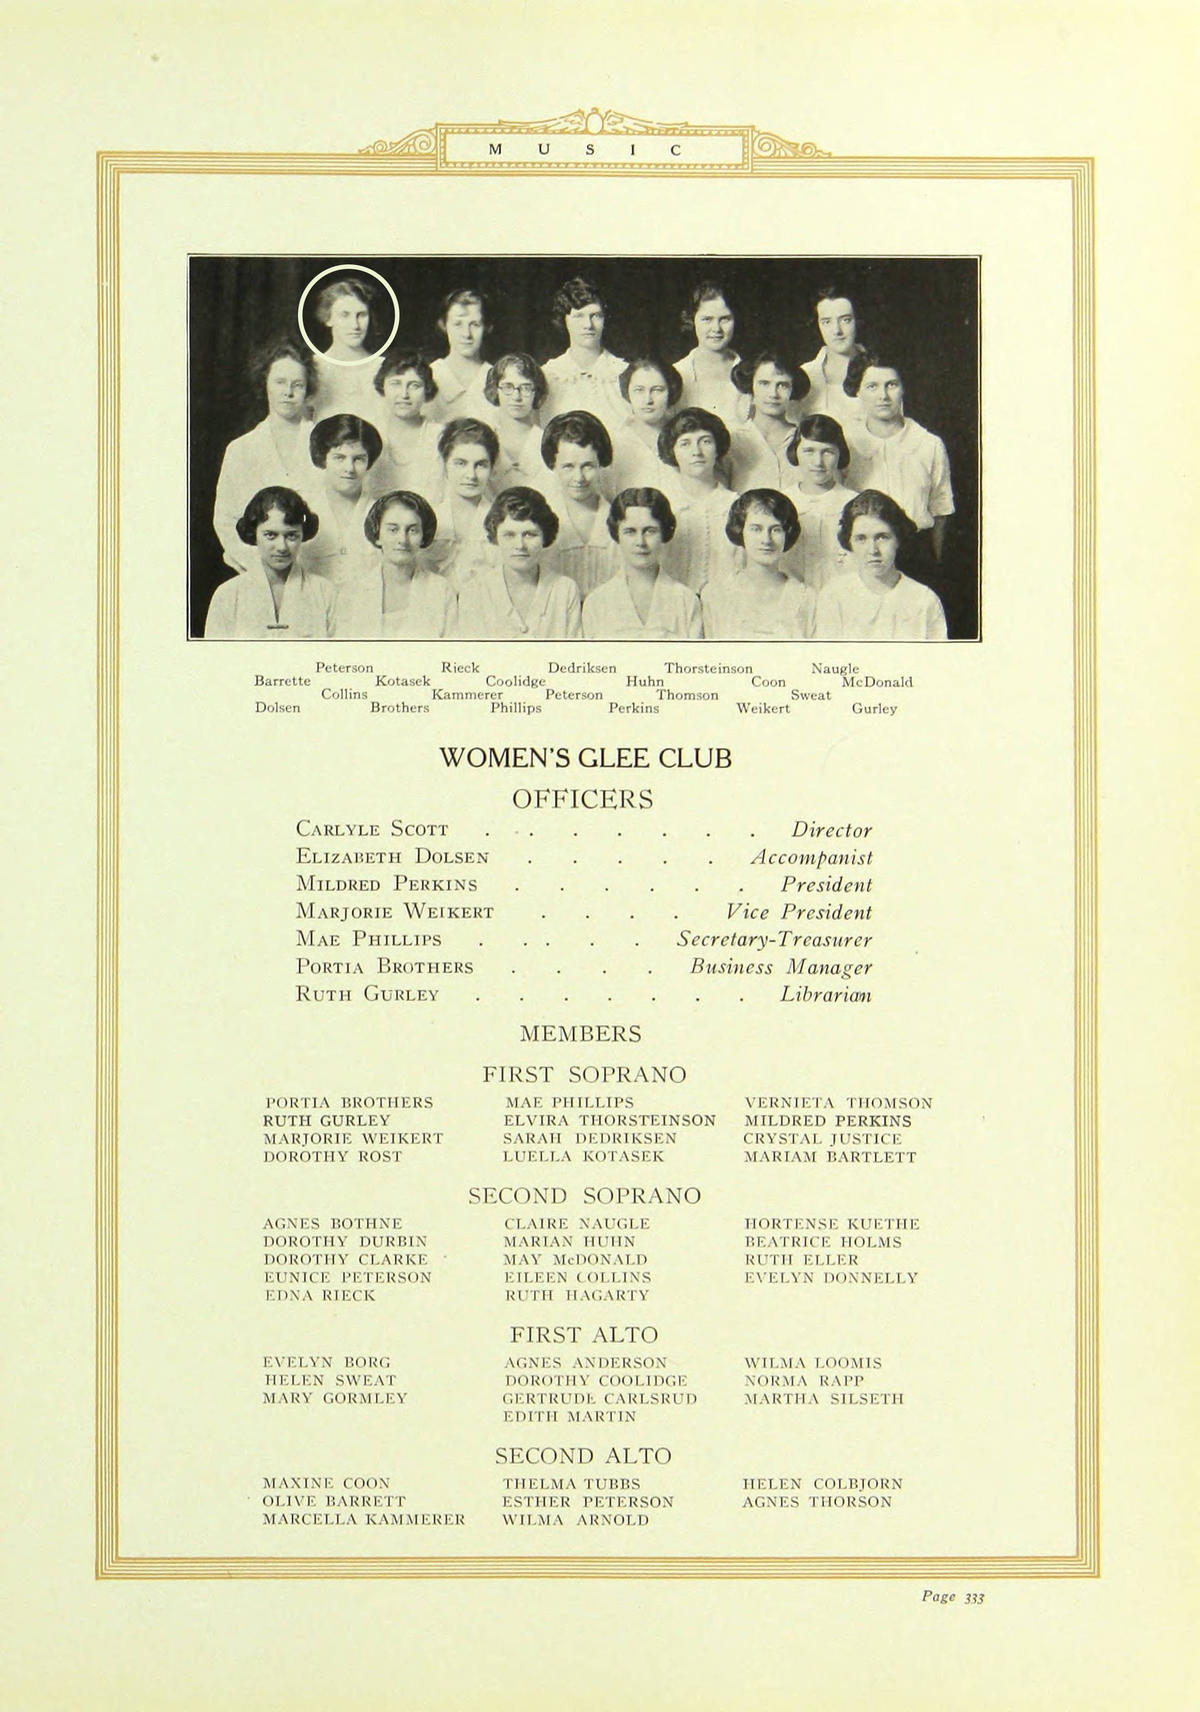 Eunice Peterson in 1923 Glee Club photograph